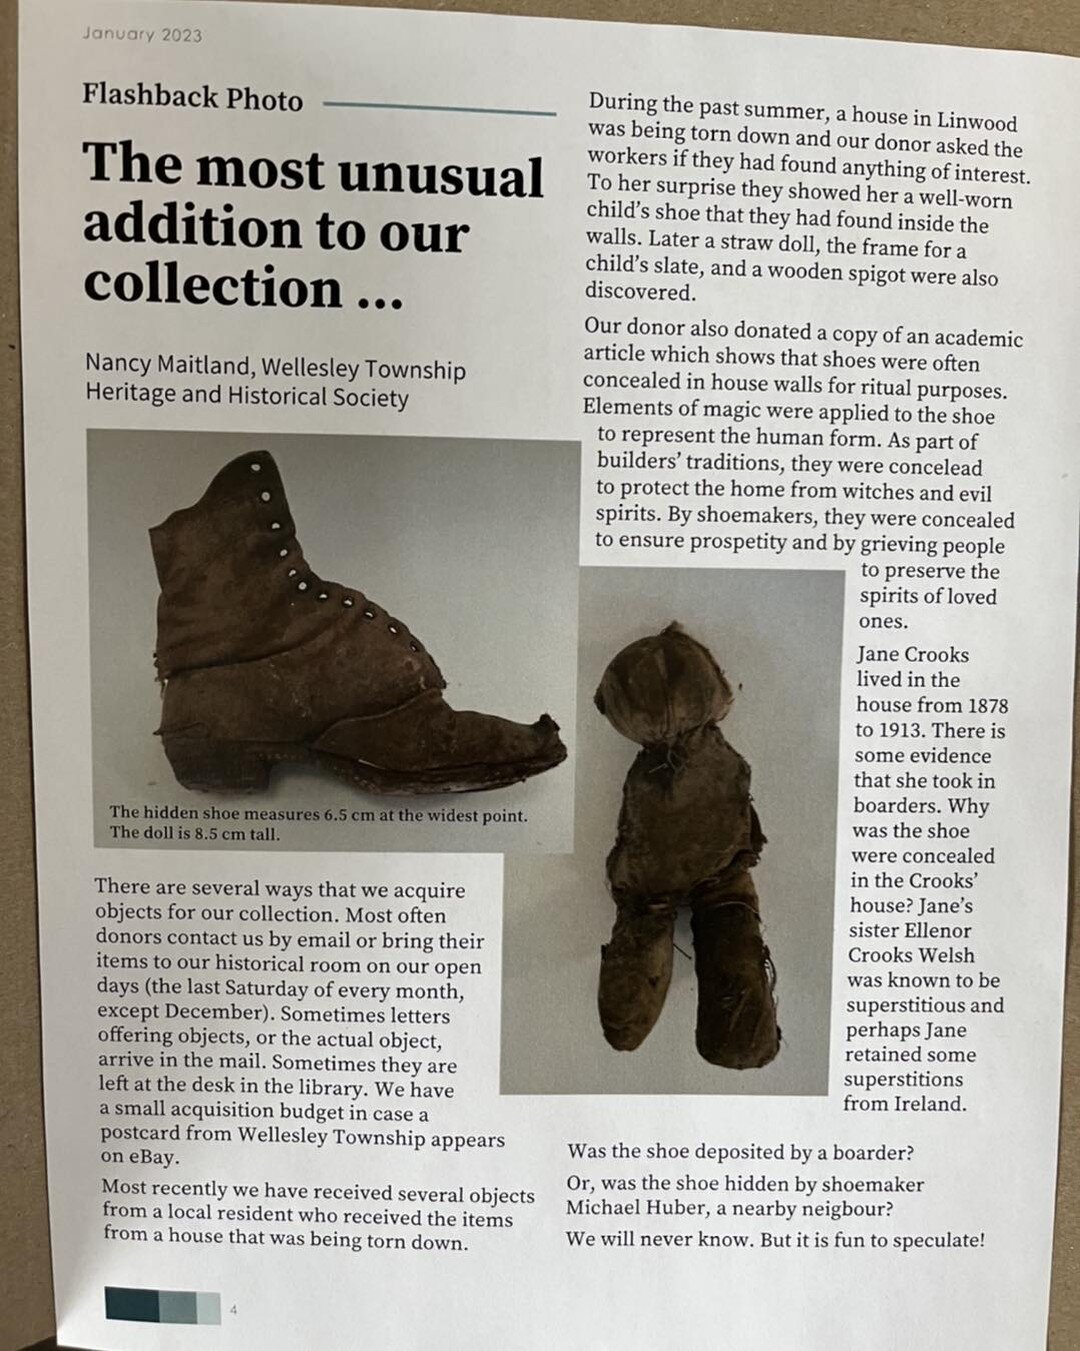 One of the cool parts of remodelling older homes is what you can find buried in the walls.  We donated a boot and doll that we found during demo and the historical society wrote an article on it and its now on display in a museum.  Very cool!